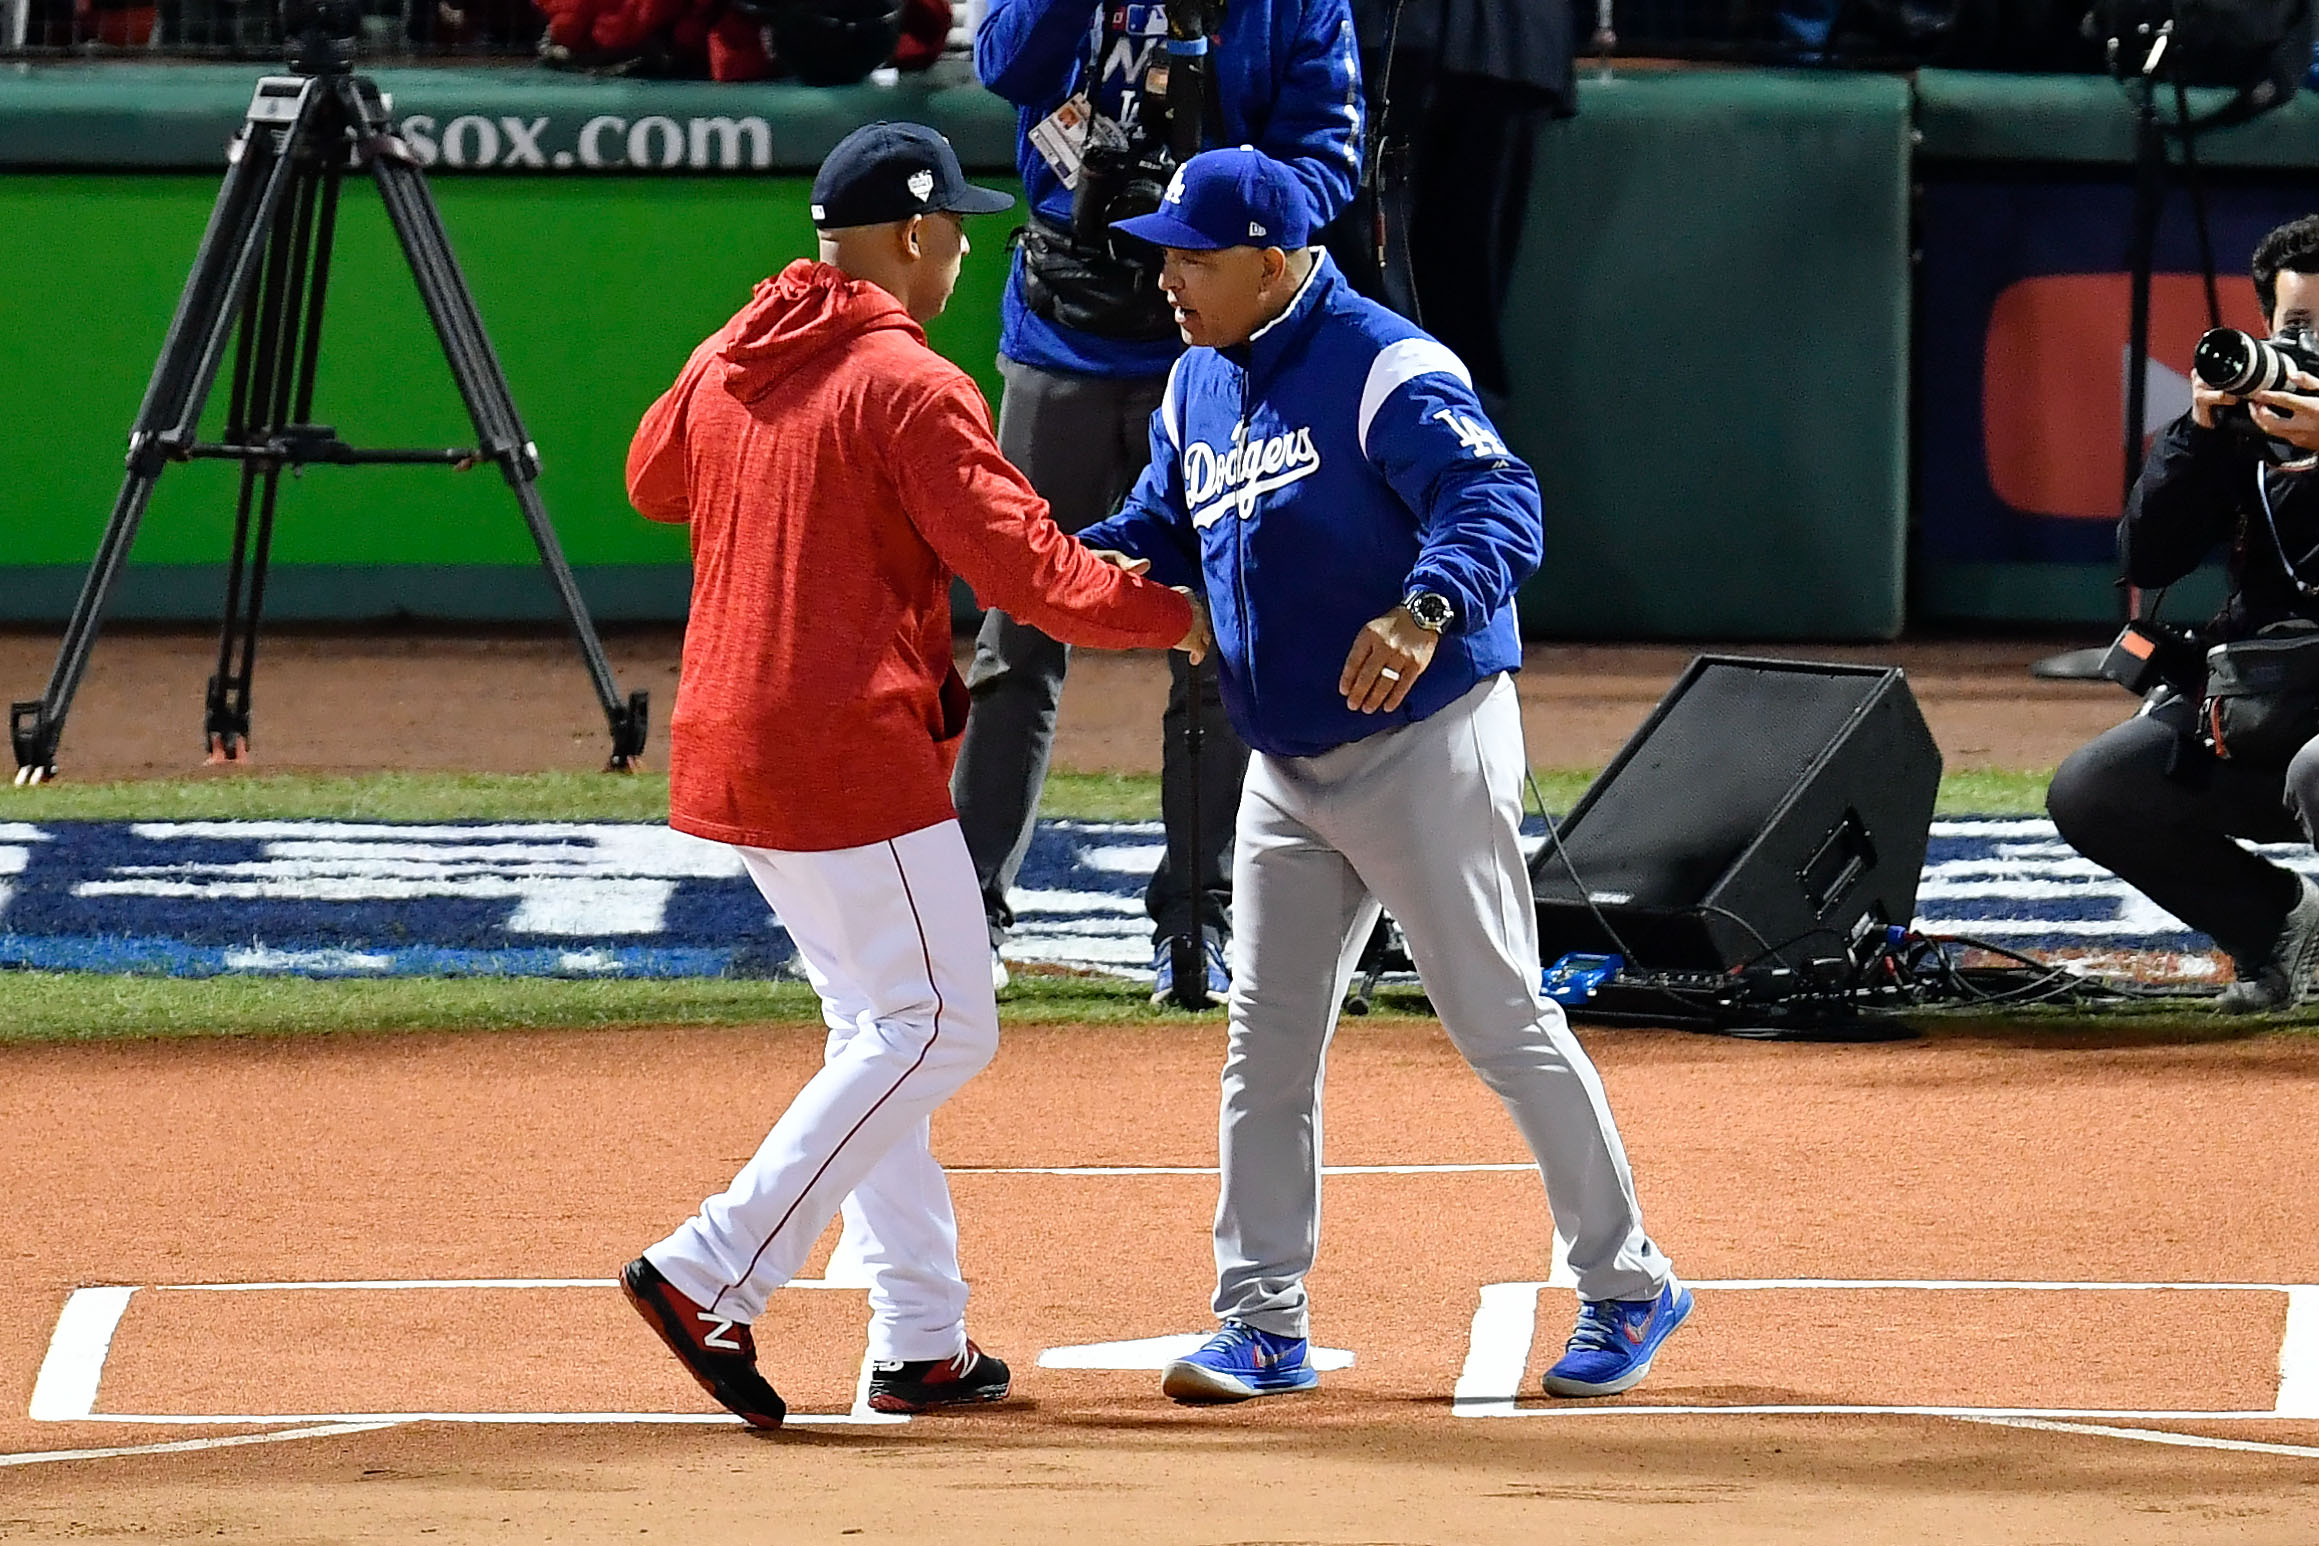 Dodgers manager Dave Roberts denies new sign-stealing accusations